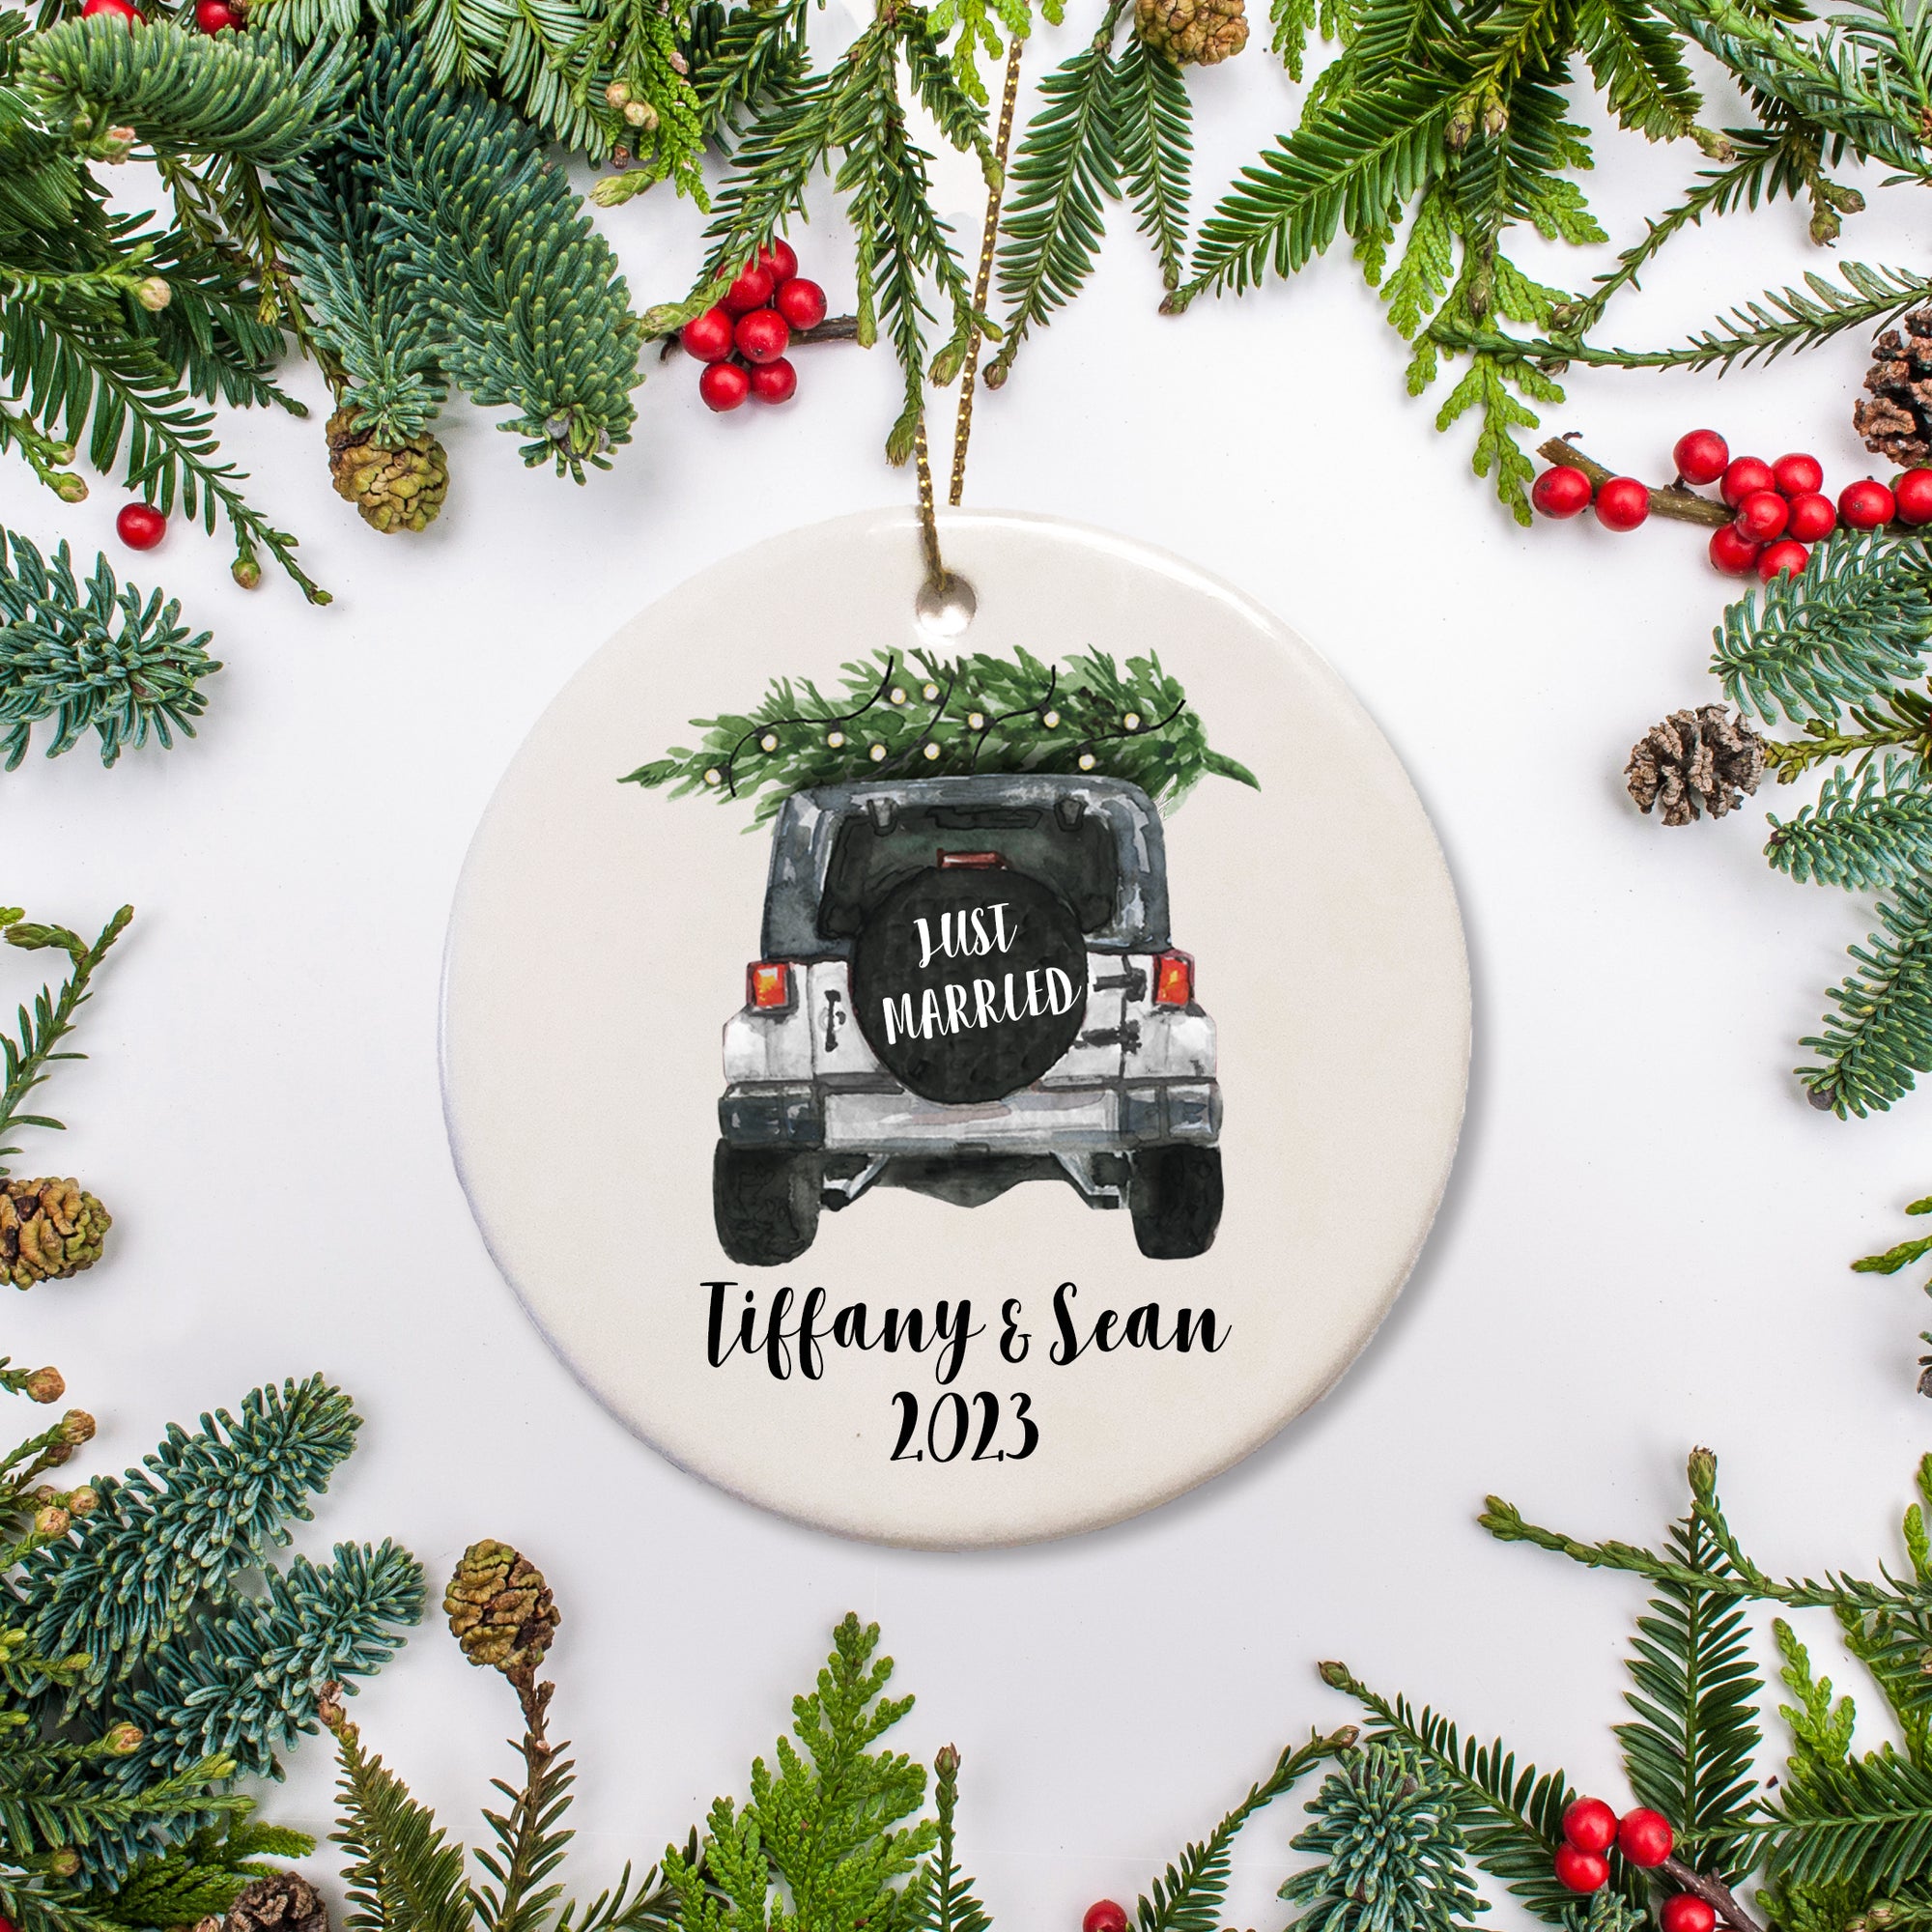 A keepsake ornament of a jeep which says “Just Married” with a Christmas tree which is personalized and includes the year. The jeep is white.